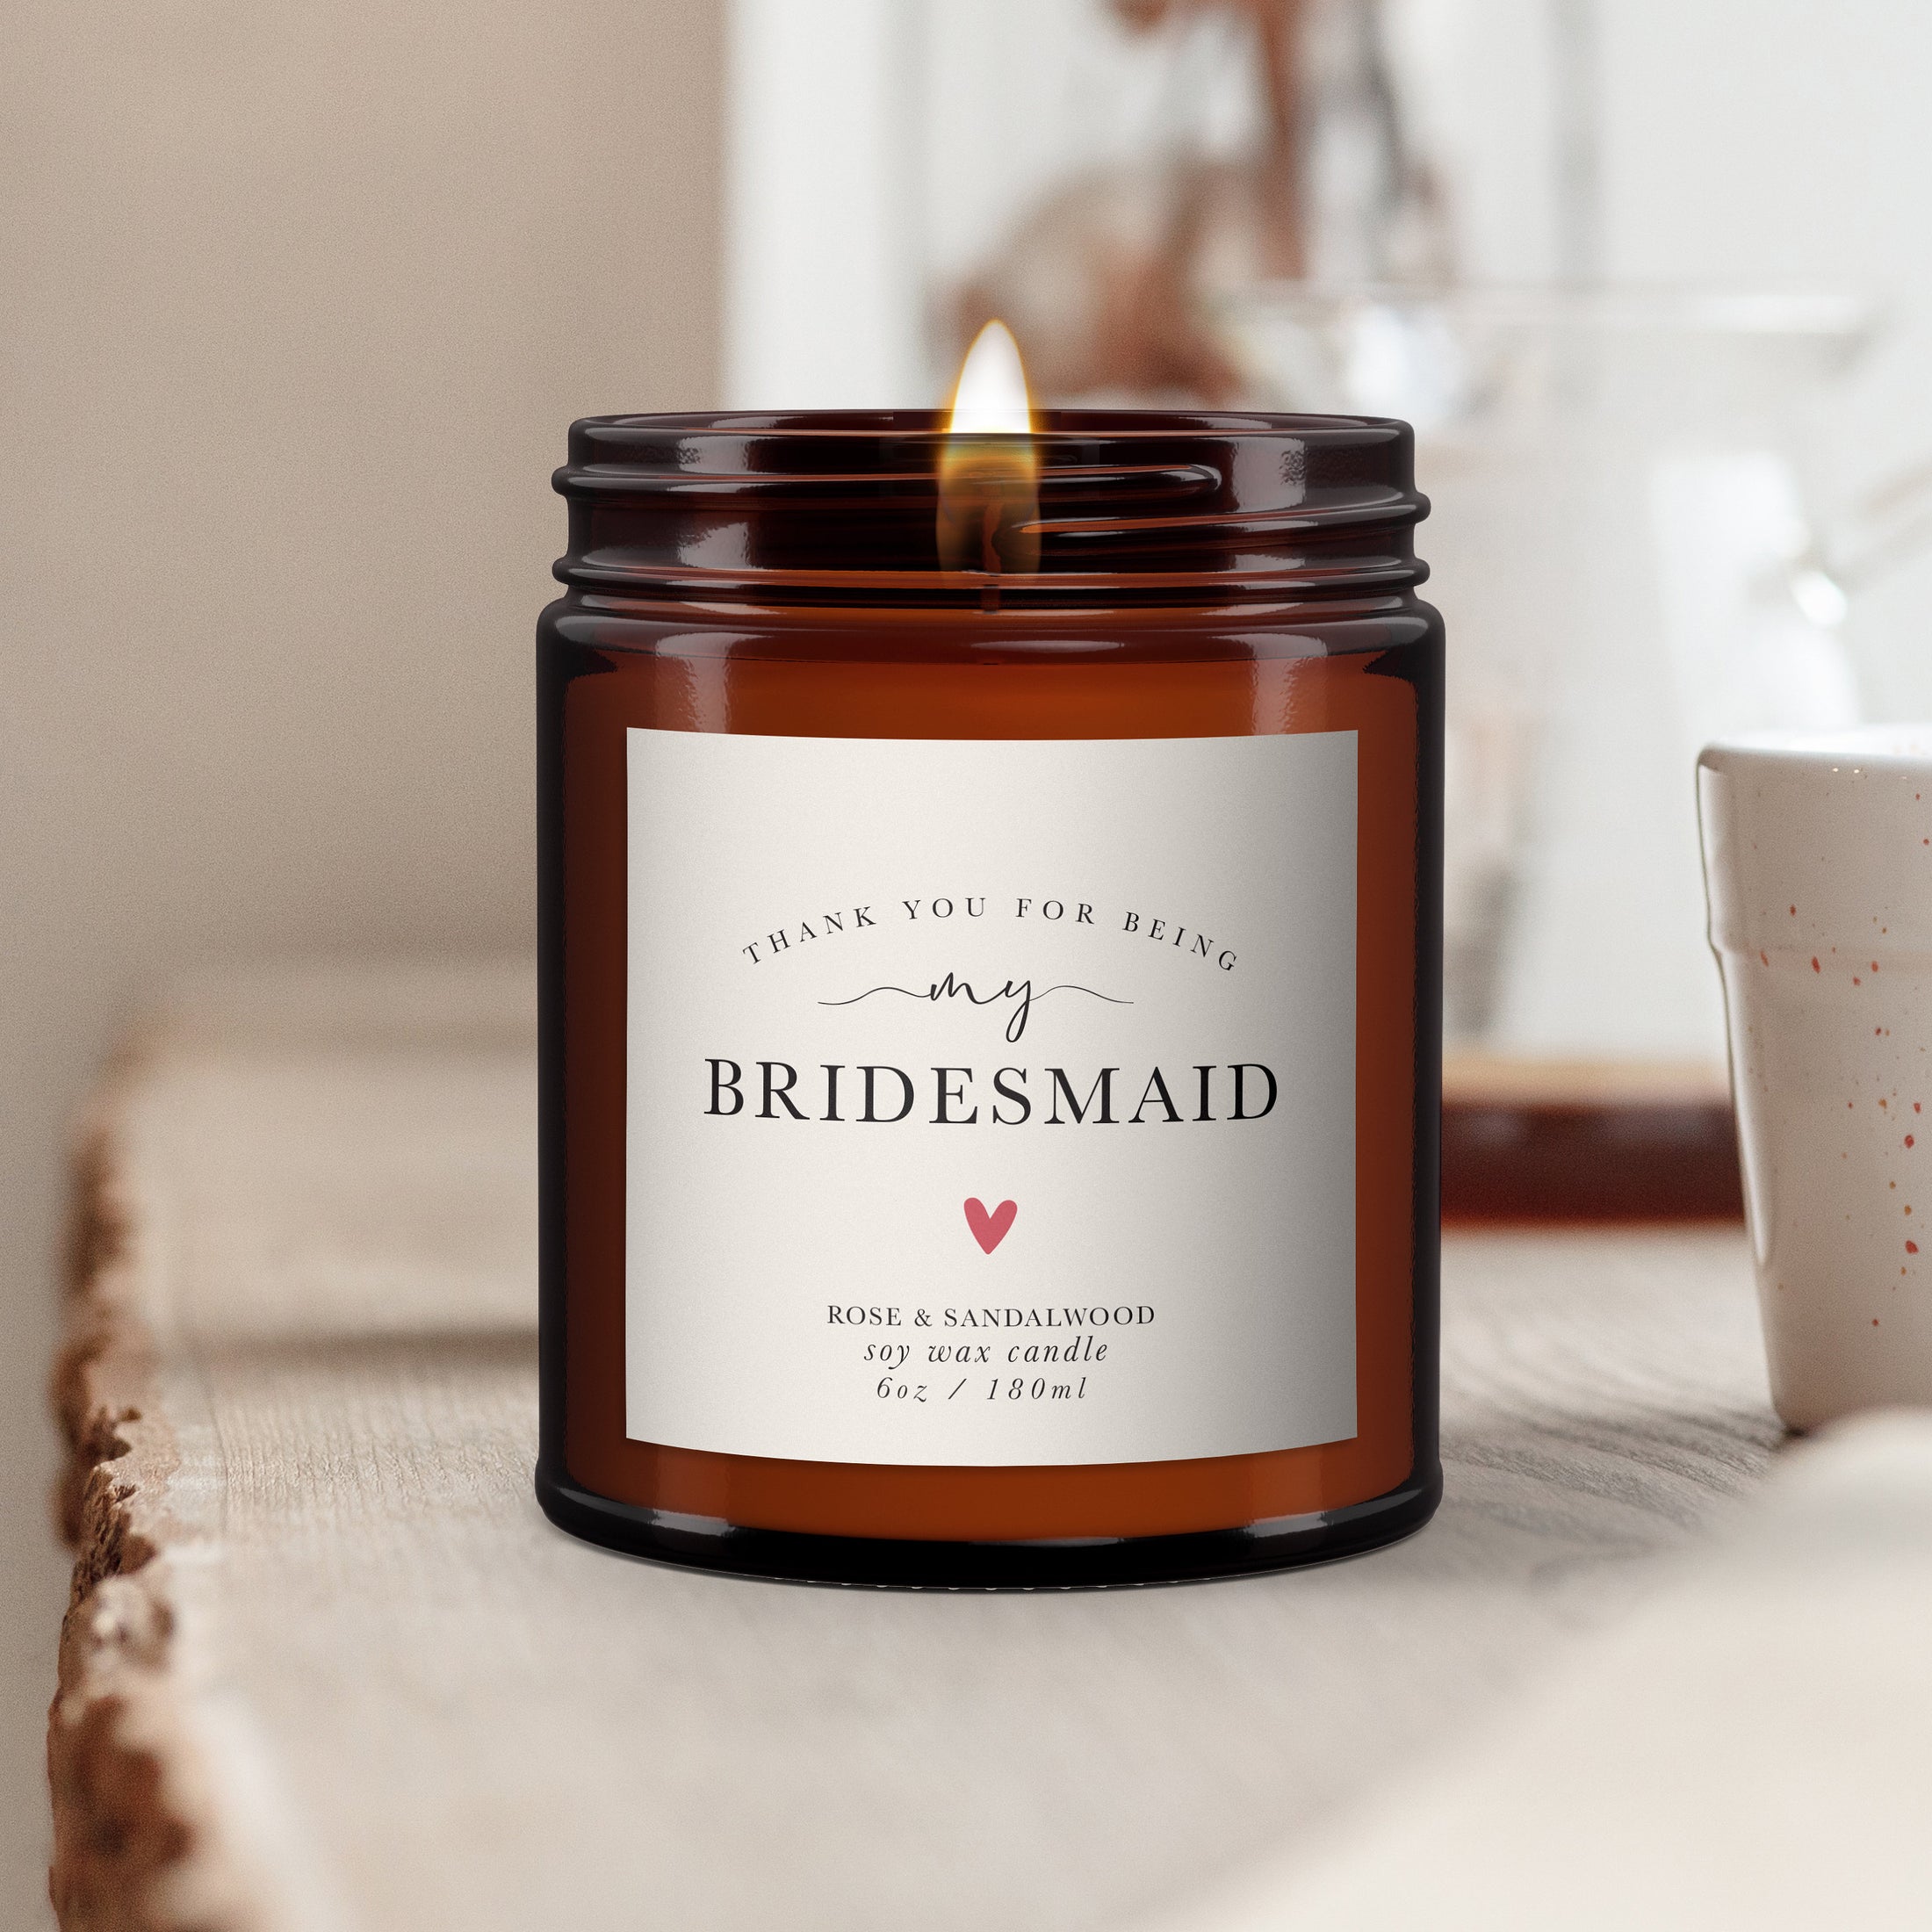 Bridesmaid Gift Personalised Candle, Pure Essential Oil Candle, Bridesmaid Gift, Gift for Bridesmaids